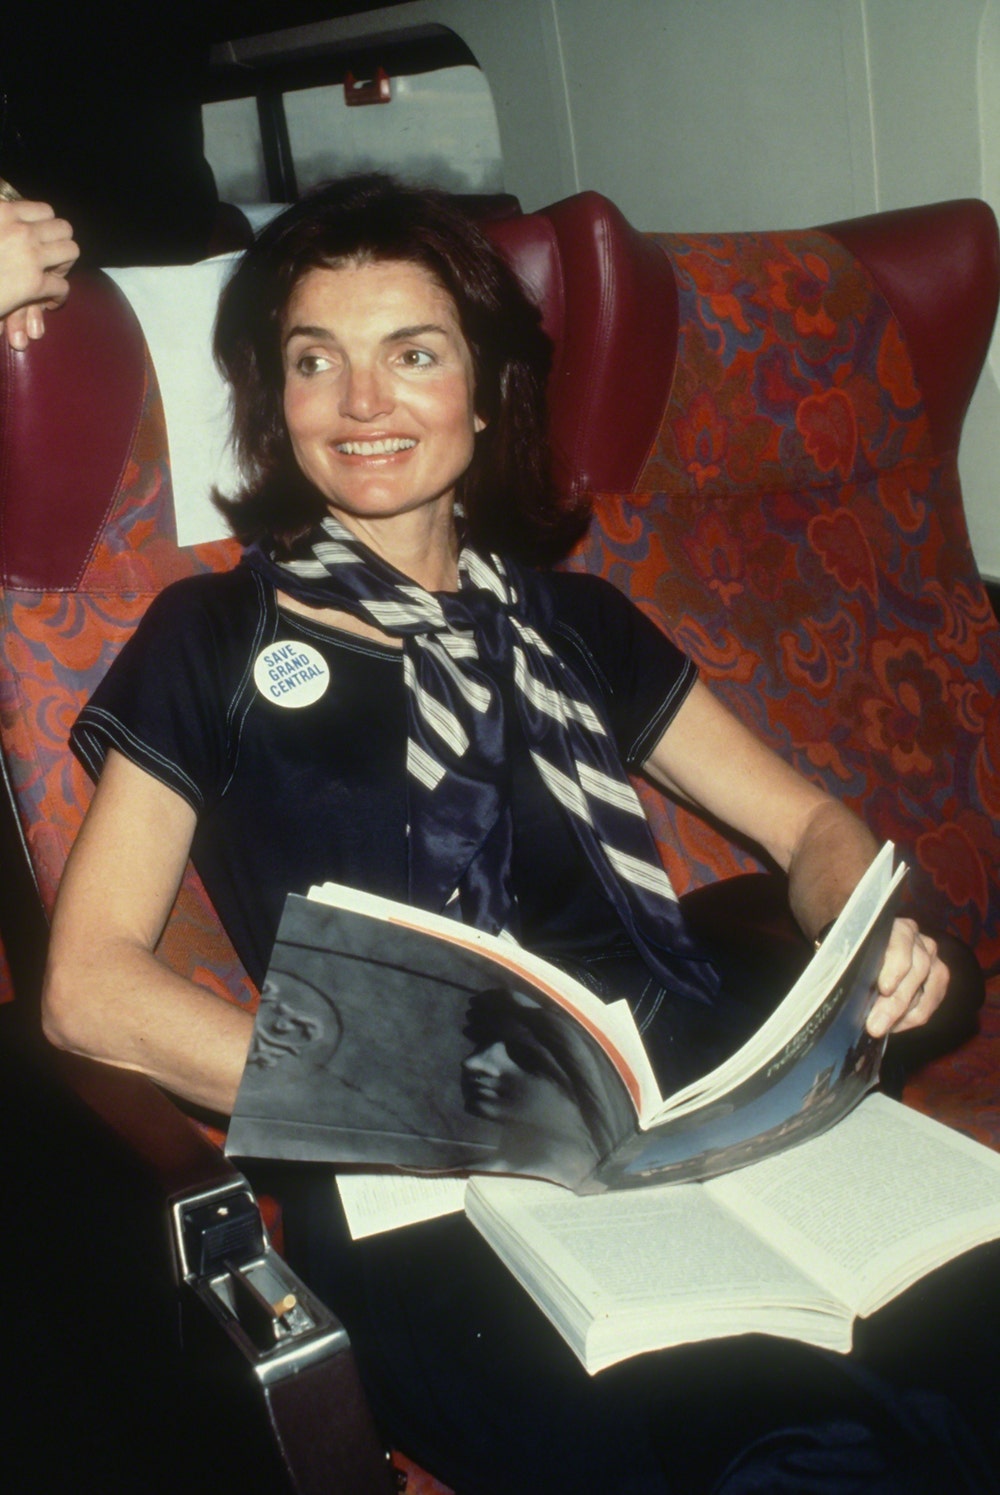 Jackie Kennedy wearing a navy suit holding a book